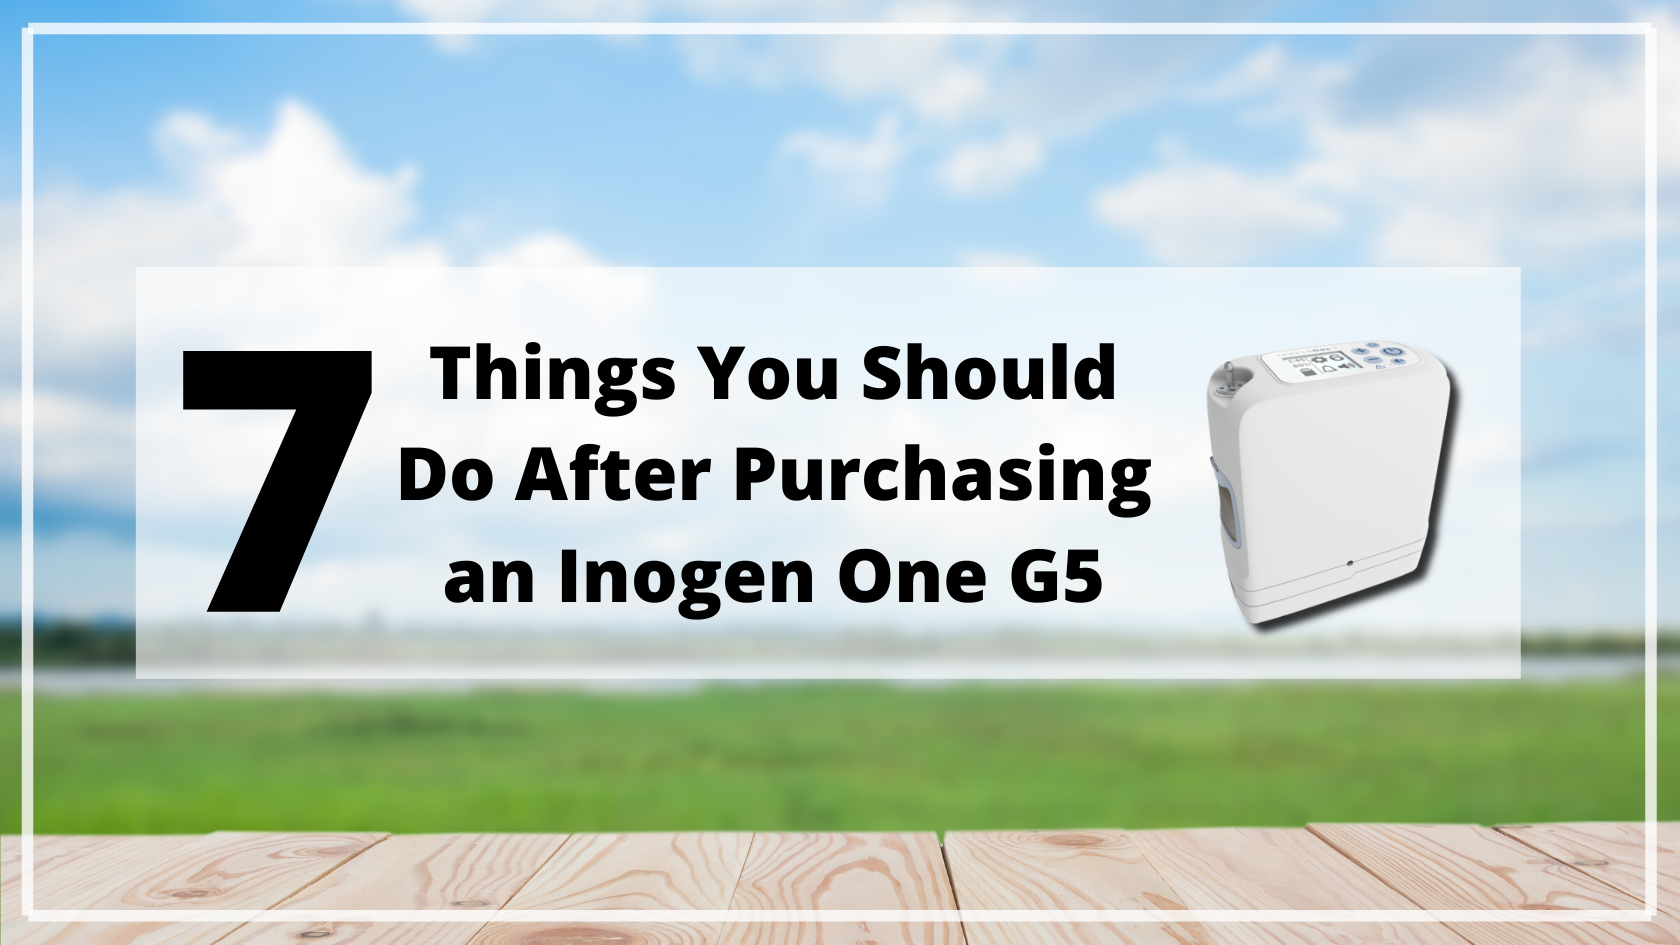 7 Things You Should Do After Purchasing an Inogen One G5 Portable Oxygen Concentrator